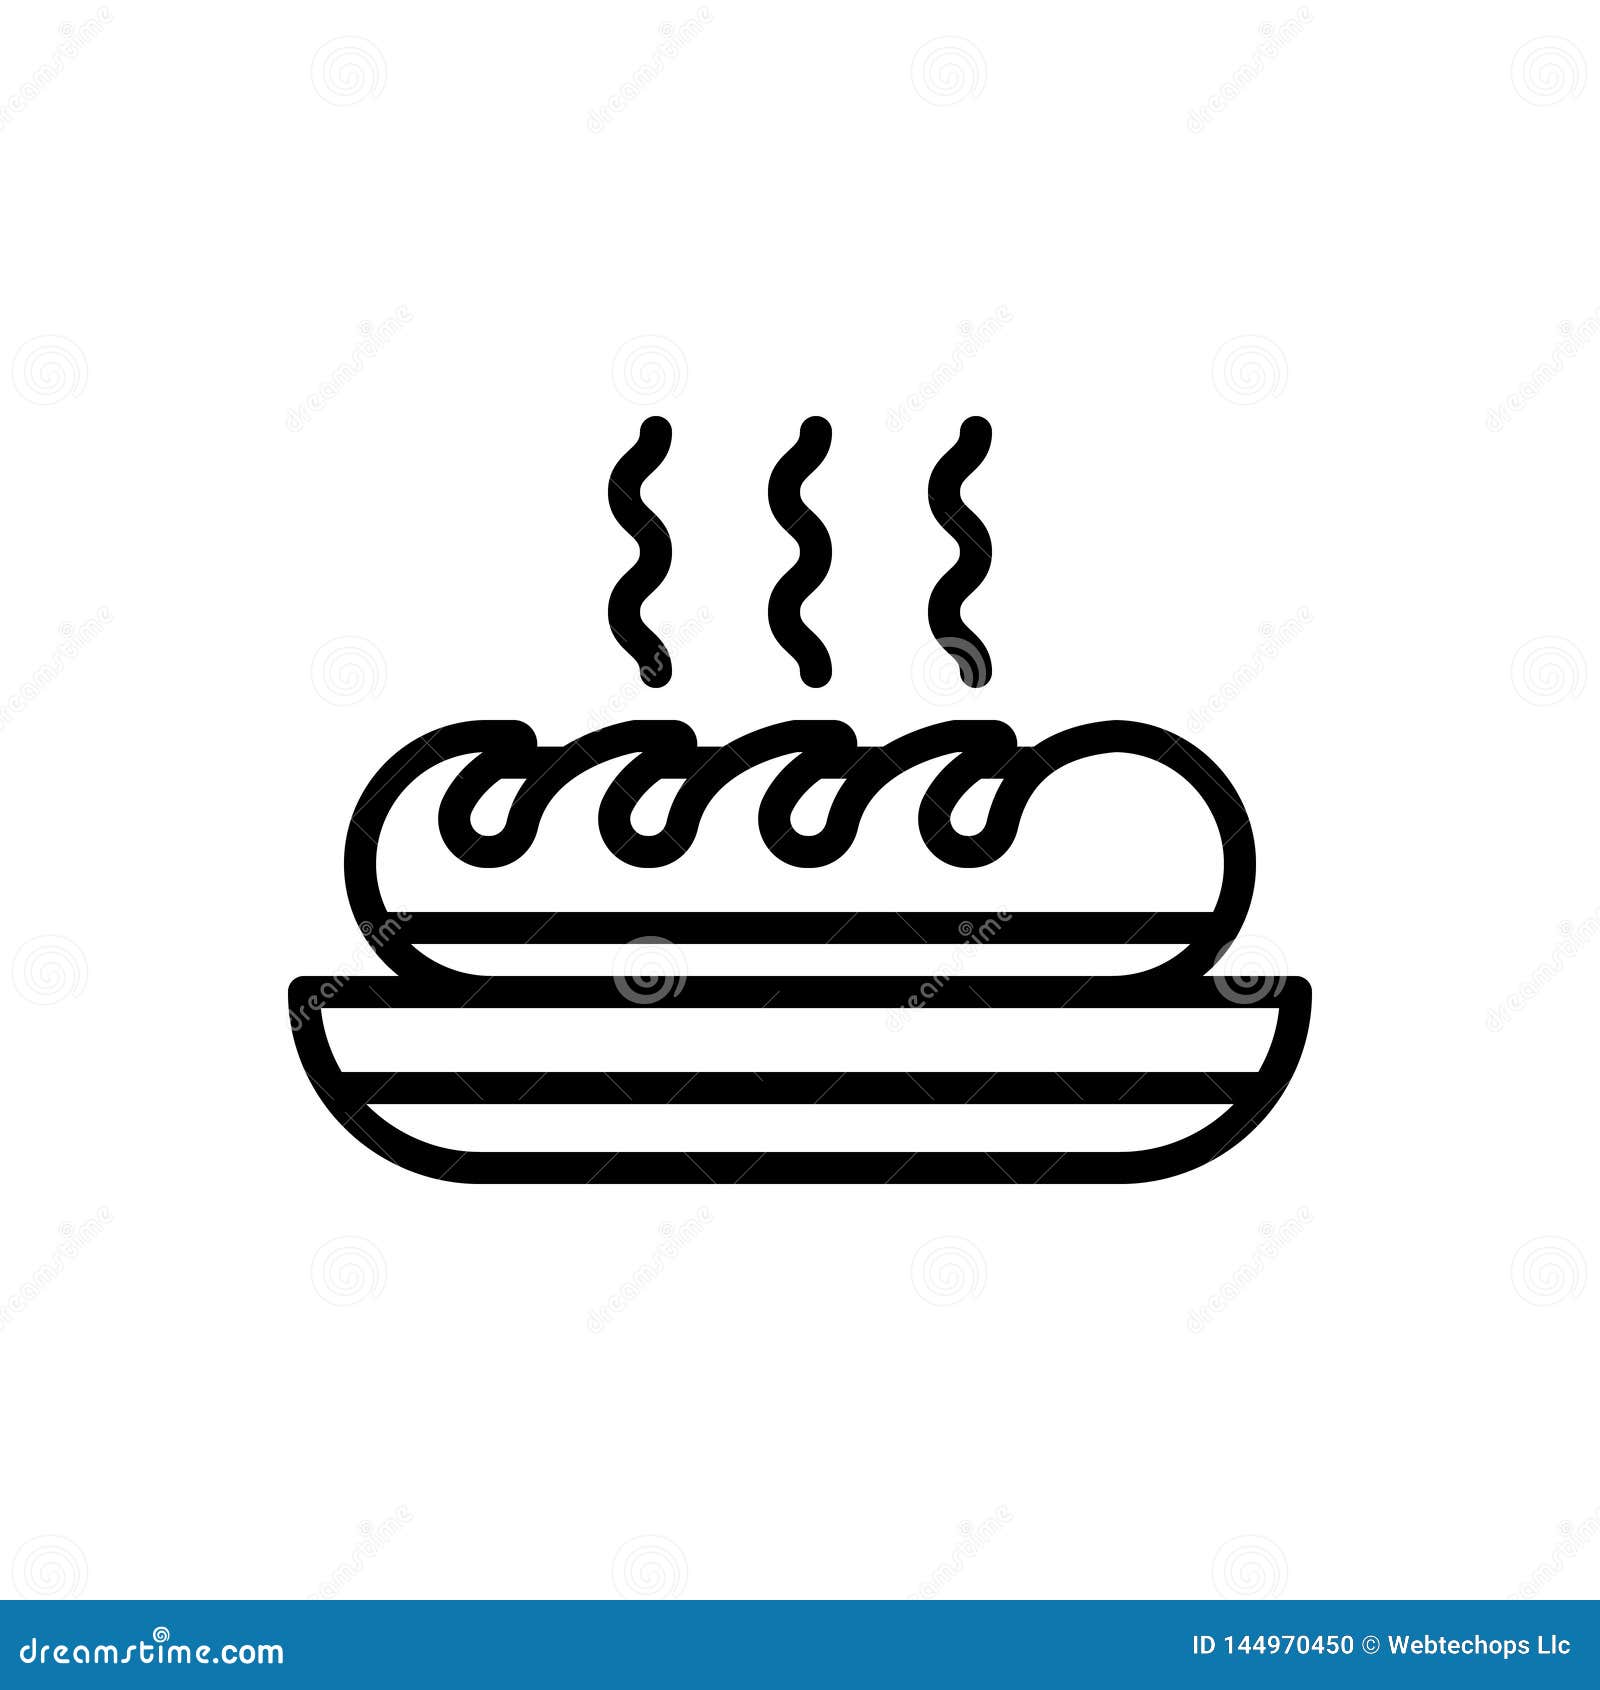 black line icon for bread, food and comestible